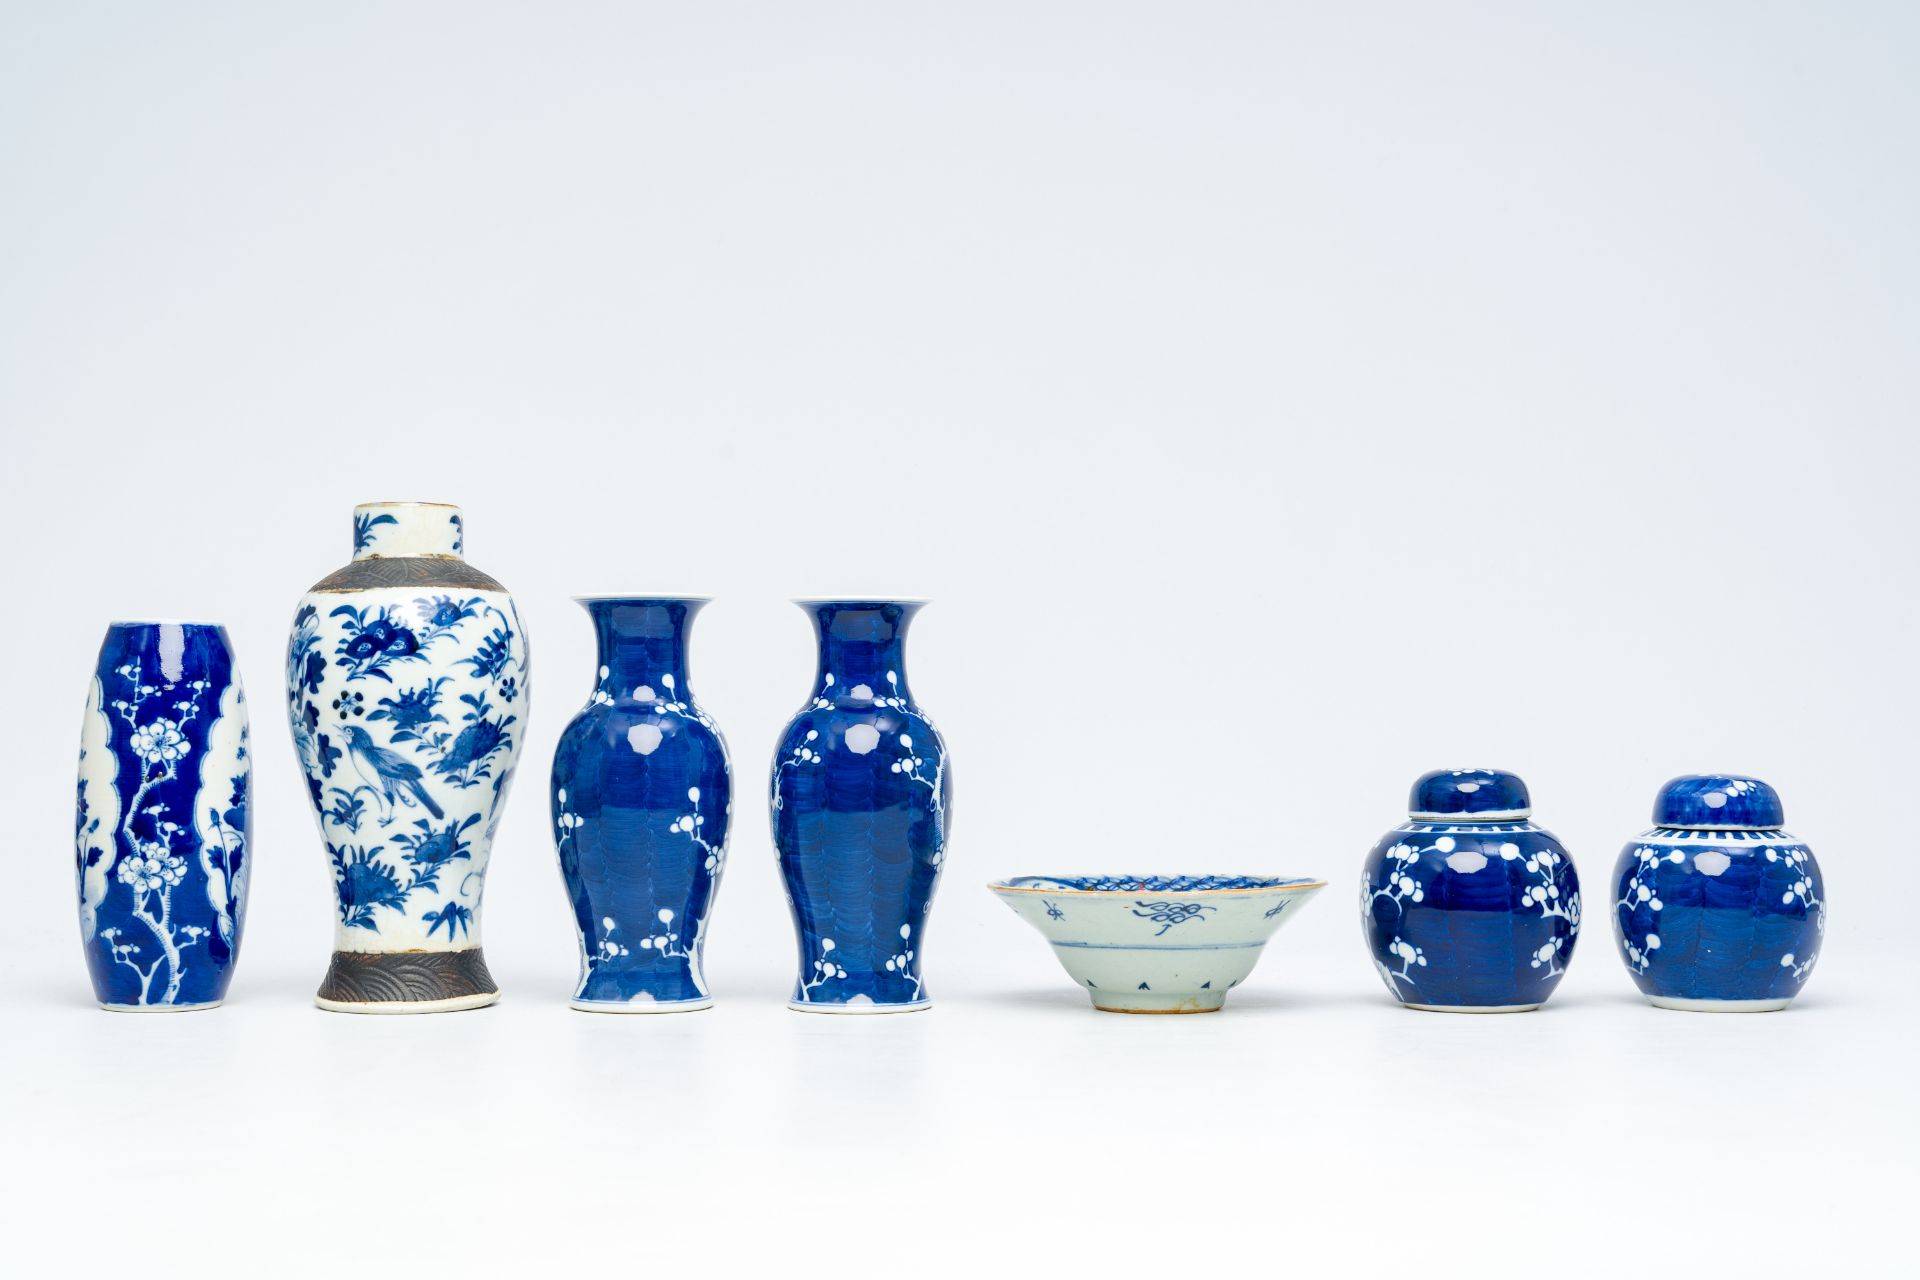 A varied collection of Chinese blue and white porcelain with floral design, 19th/20th C. - Image 6 of 18